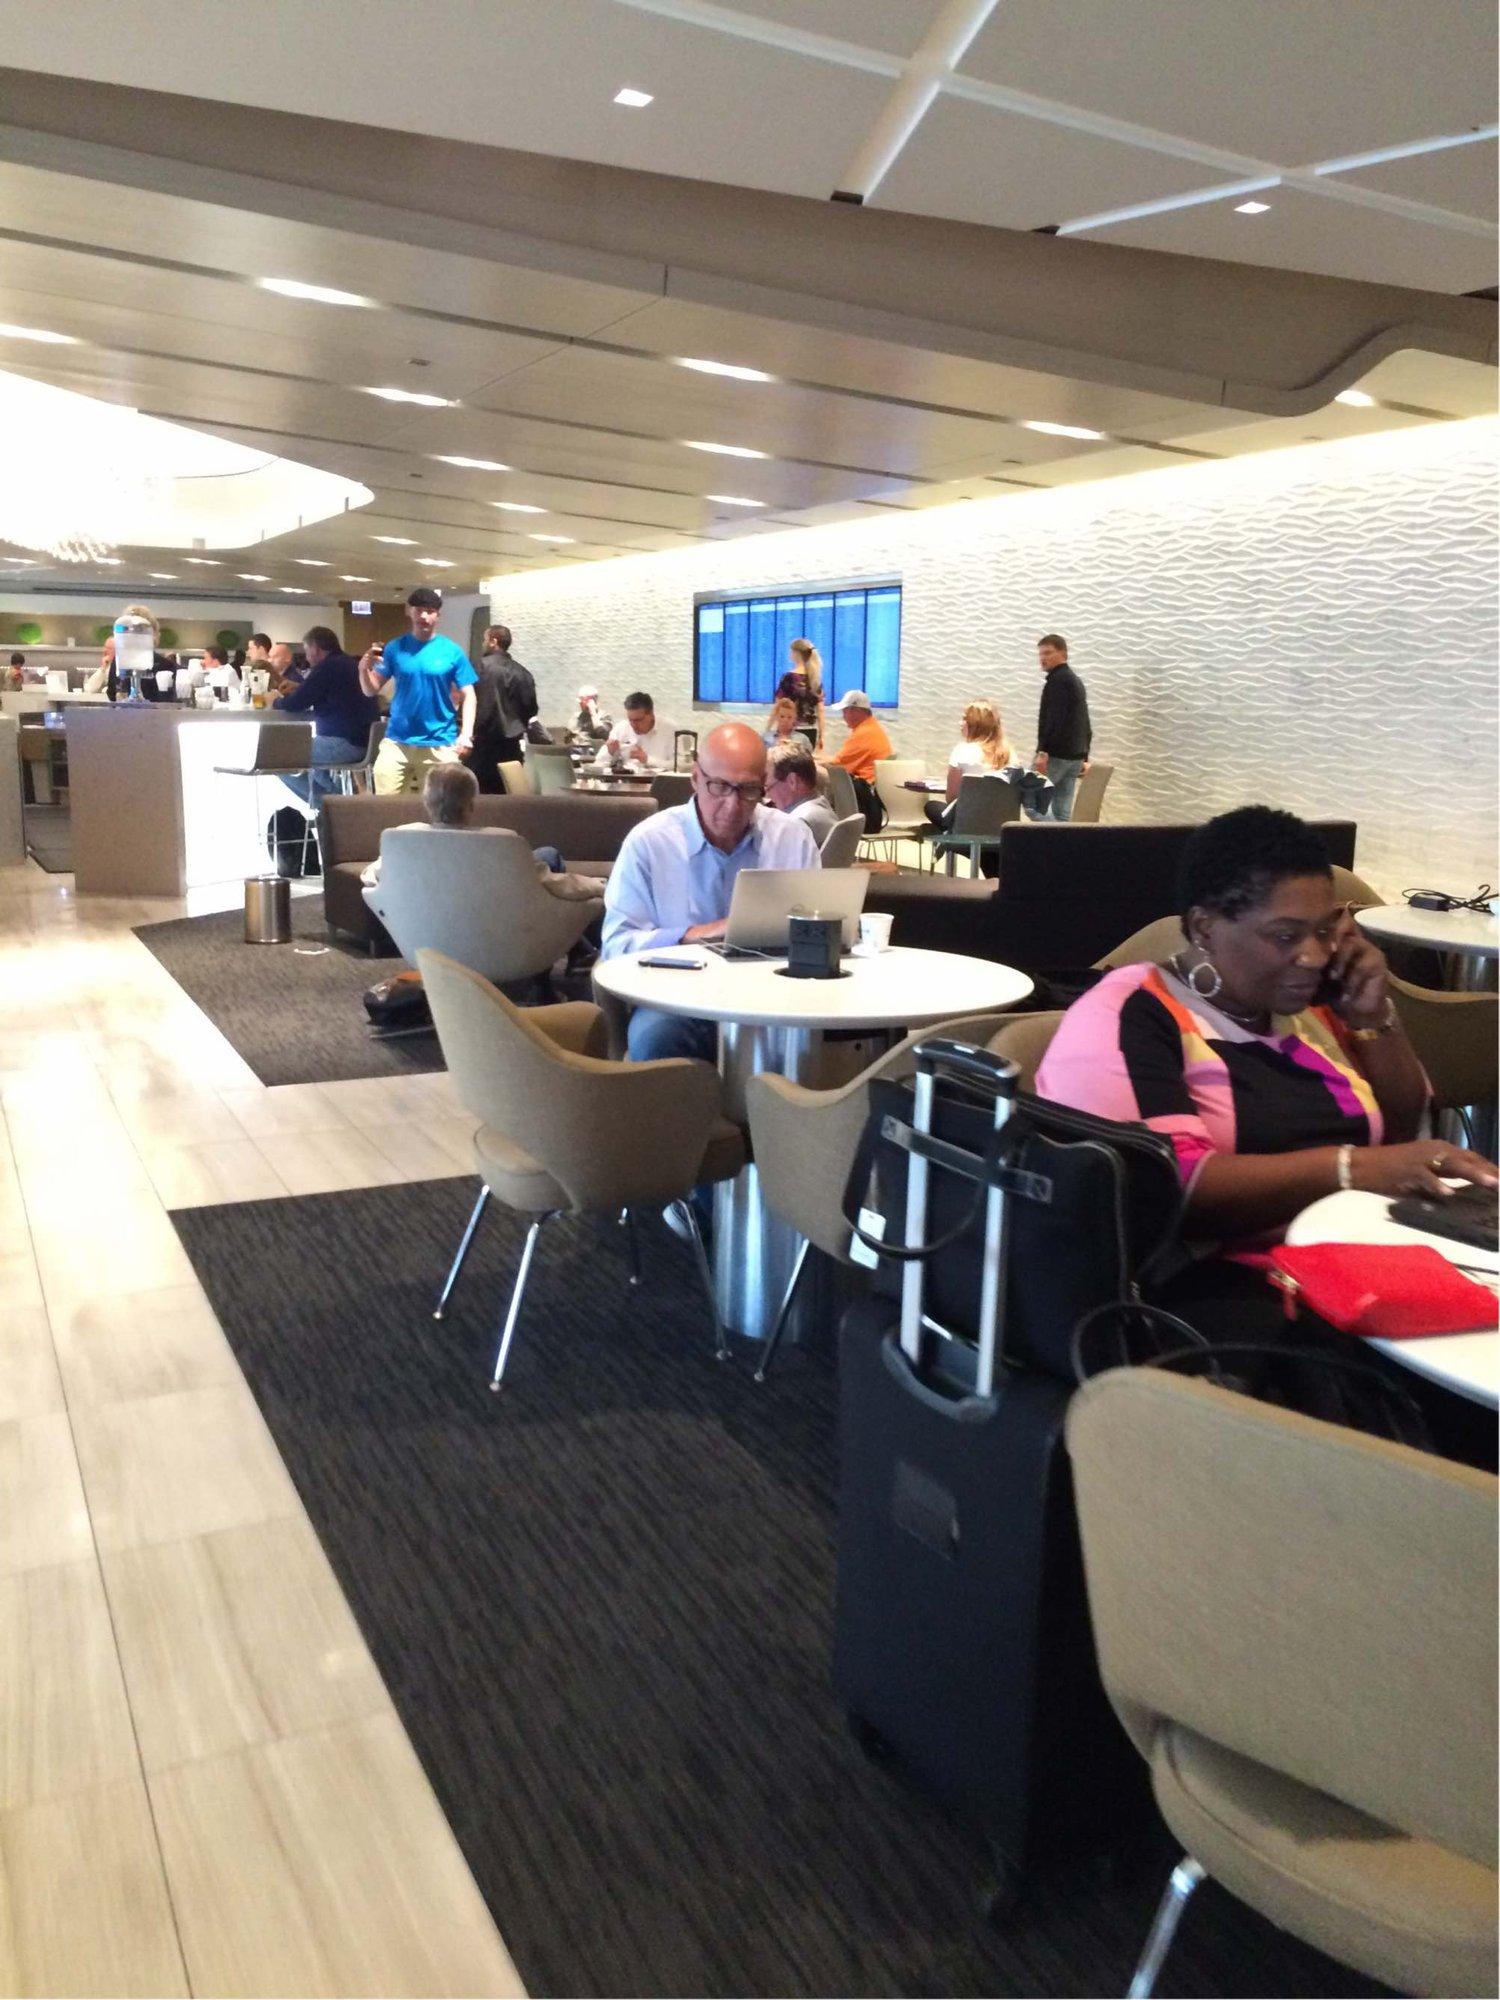 United Airlines United Club (Gate F8) image 32 of 45